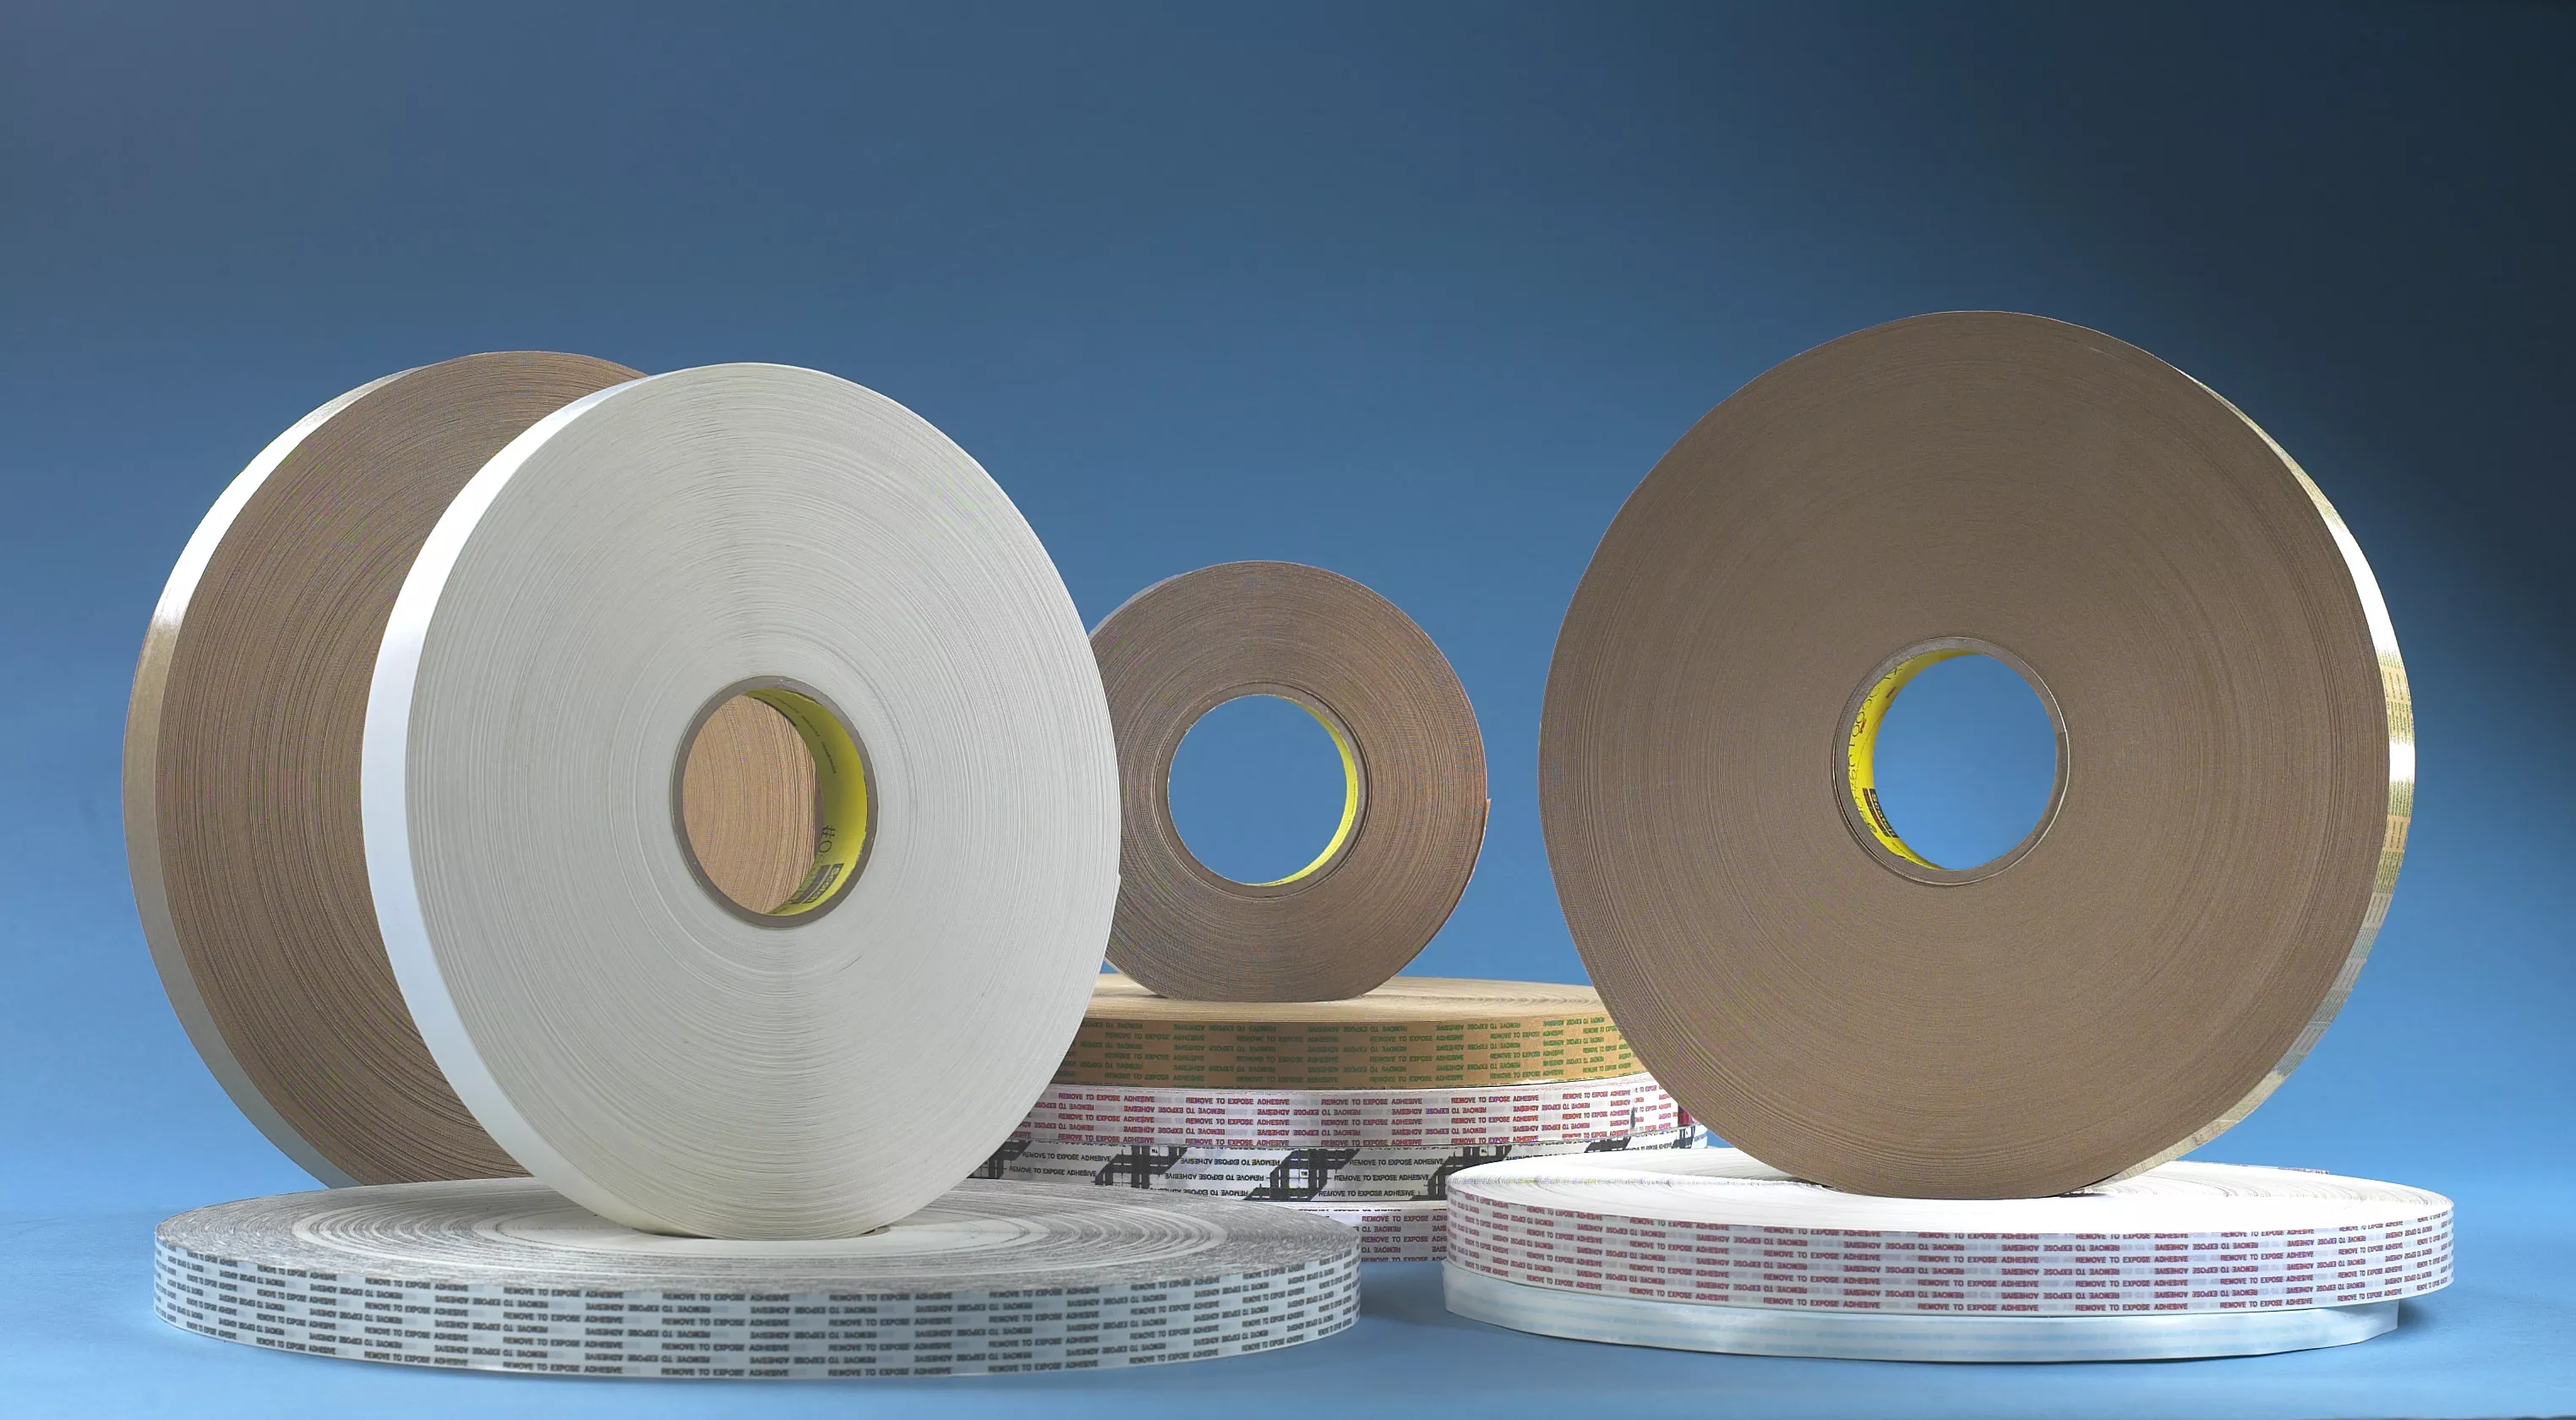 SKU 7000001155 | 3M™ Adhesive Transfer Tape Extended Liner 920XL